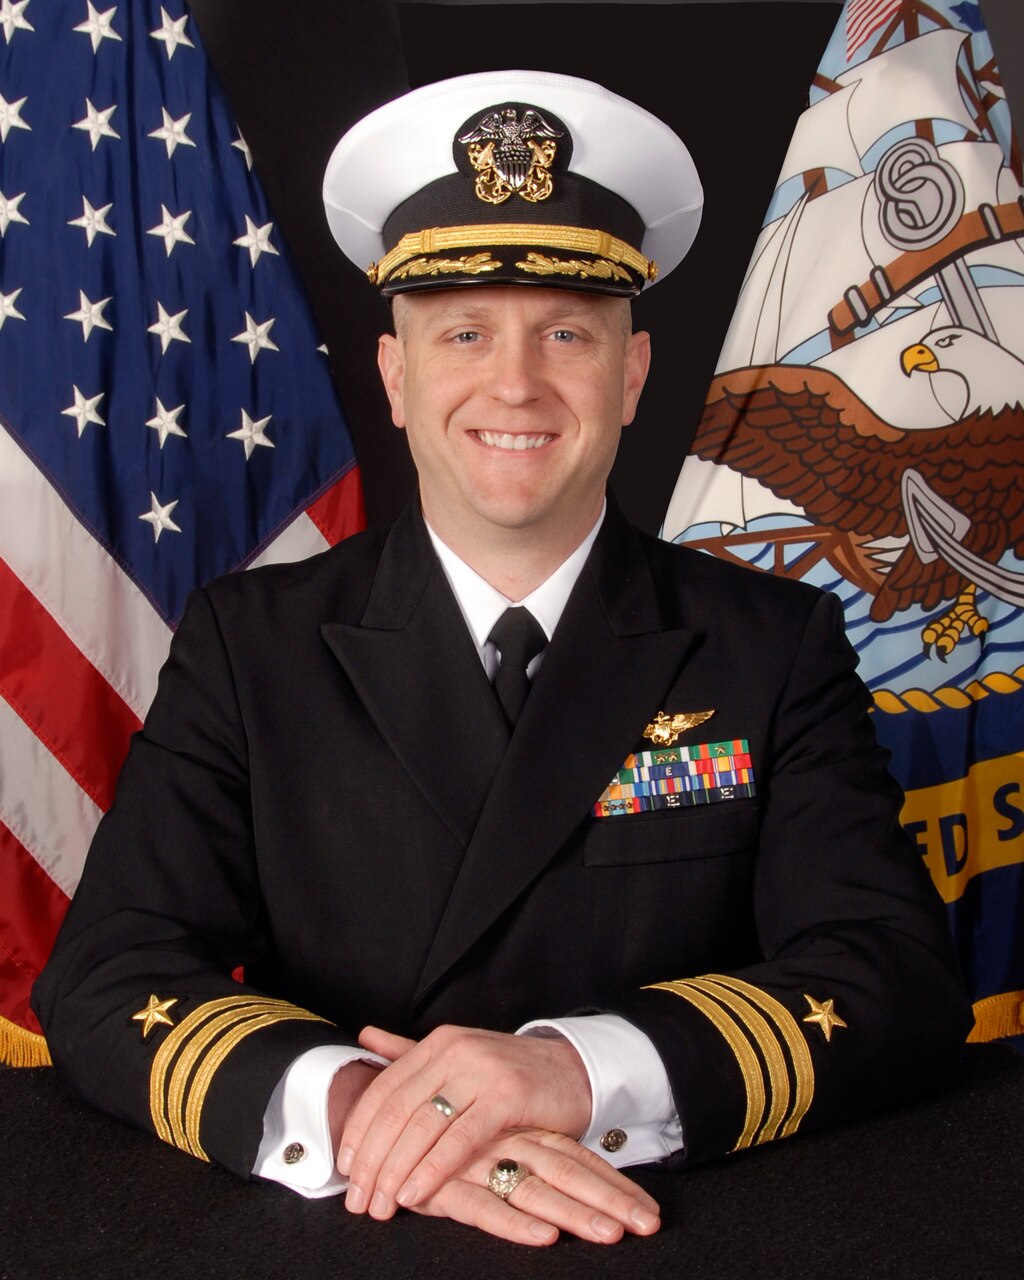 Official photo of CDR Regelin